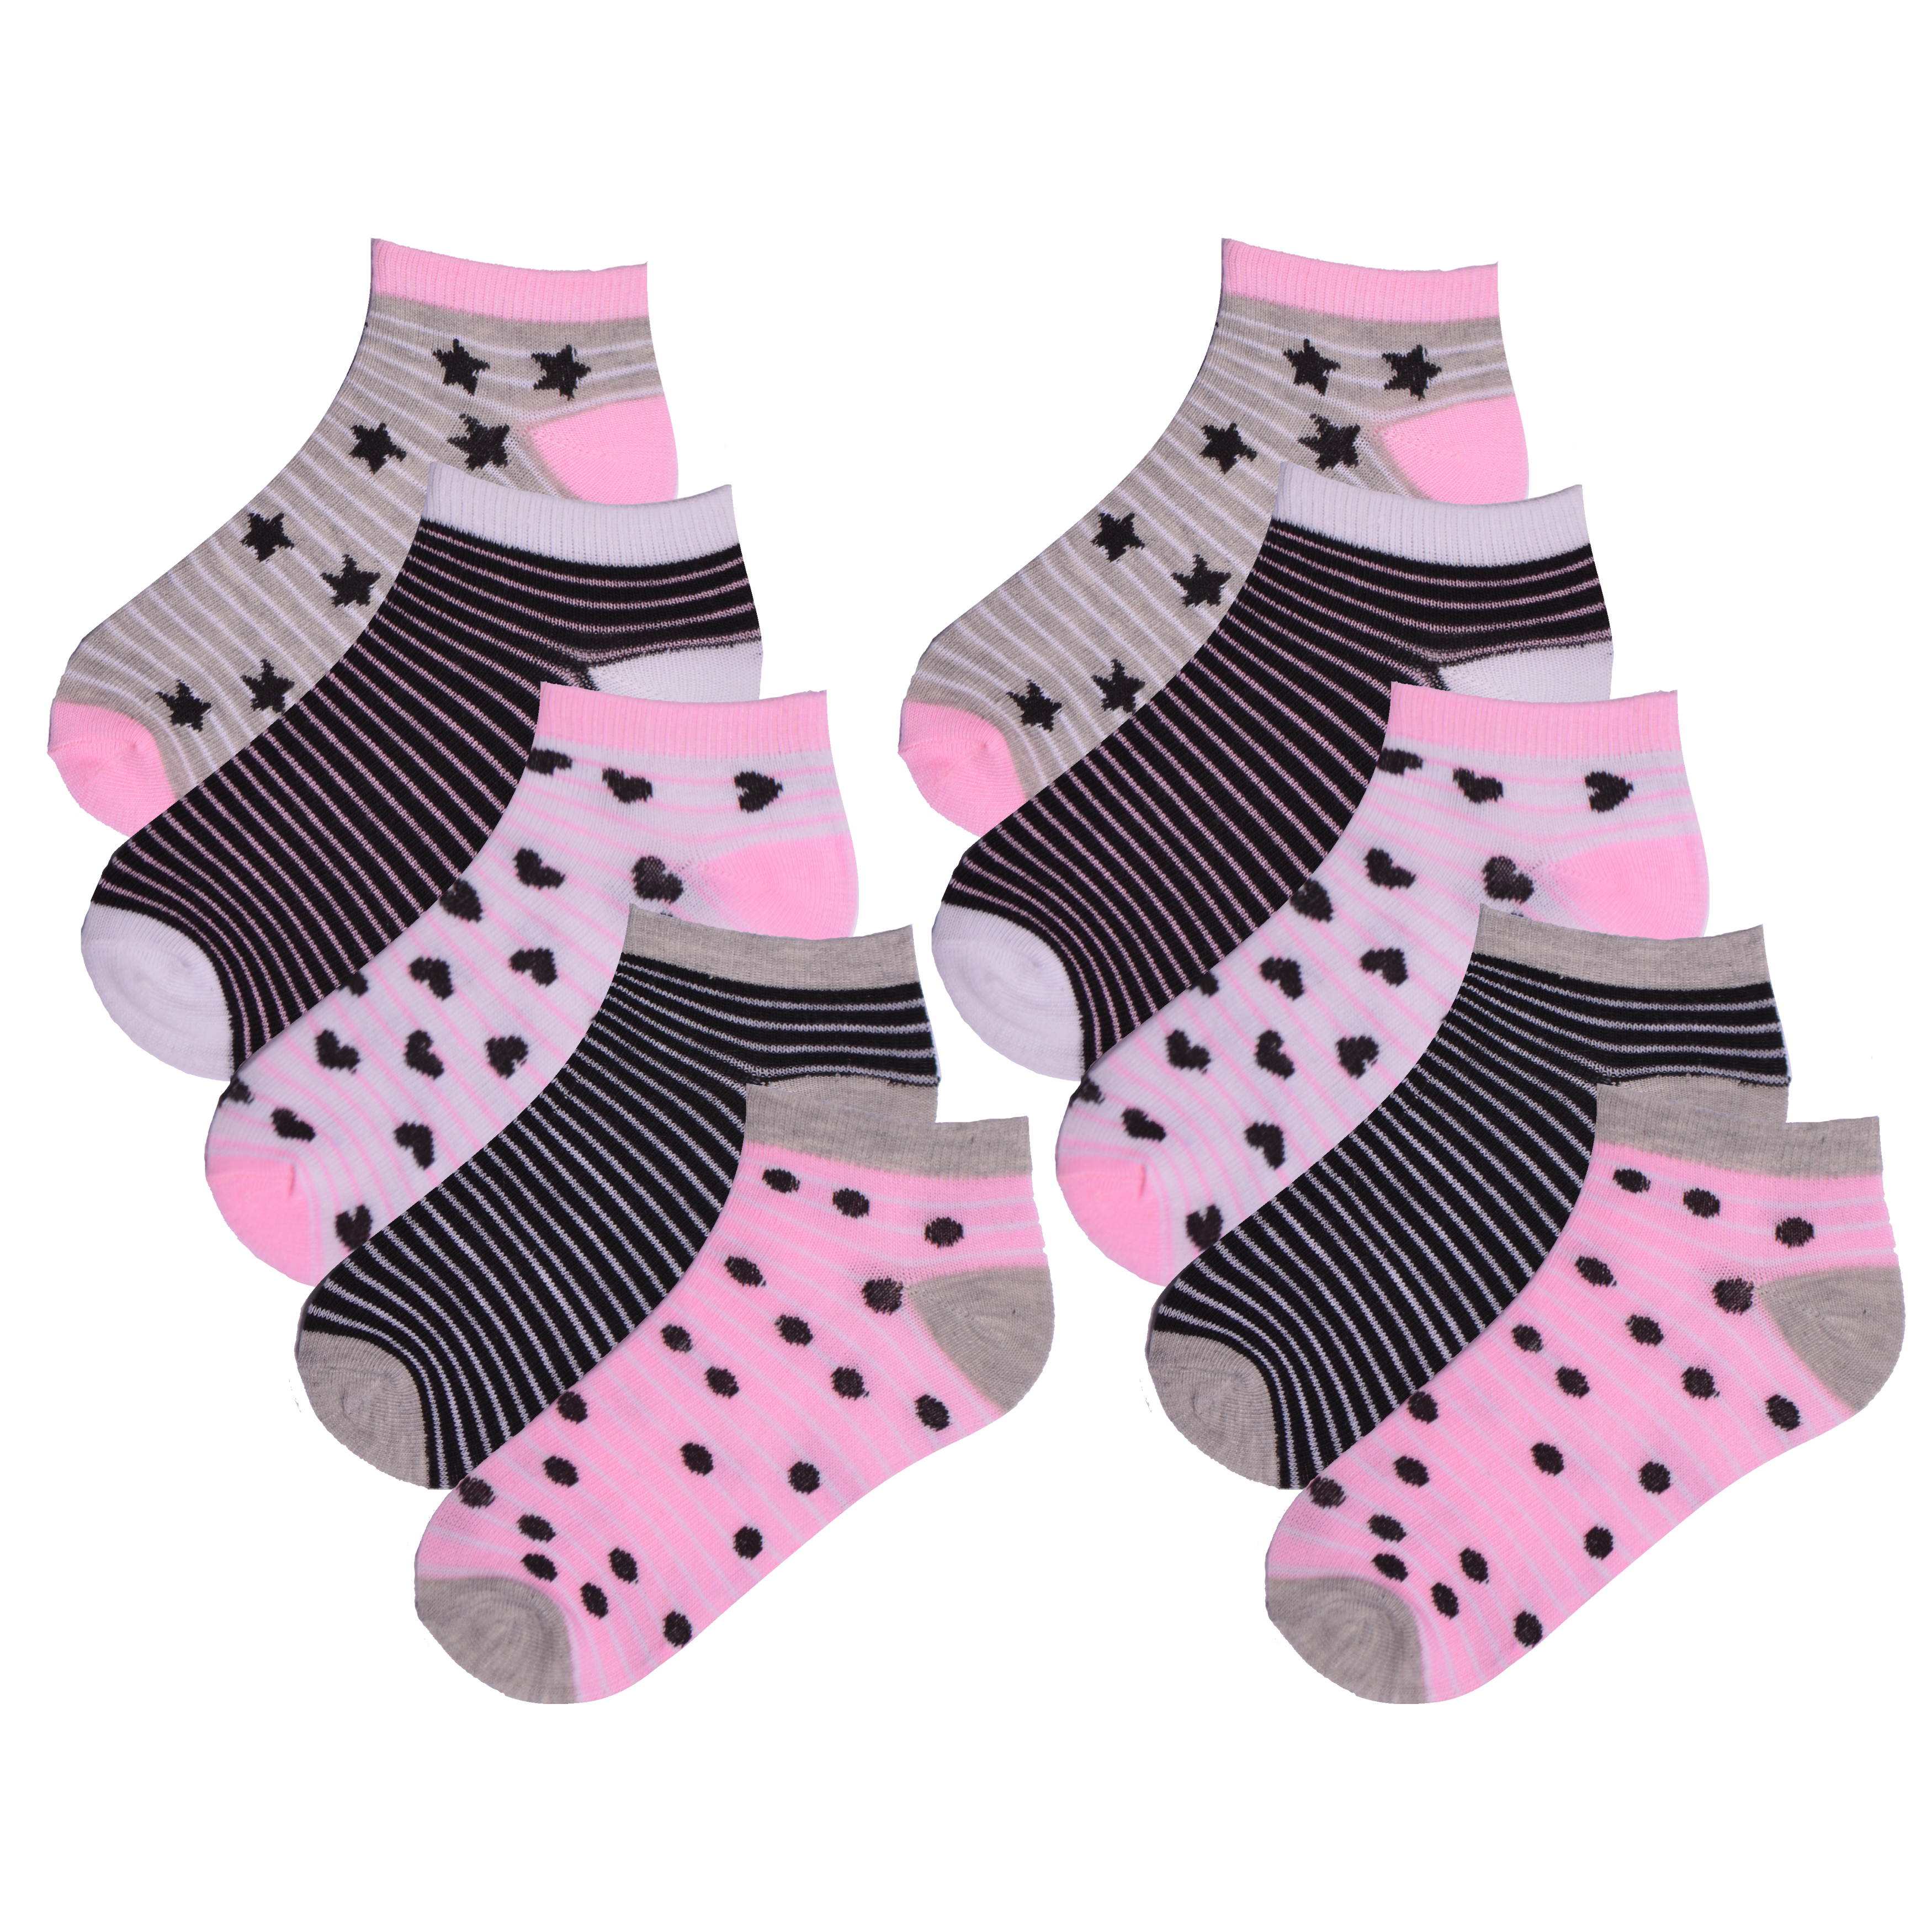 5 10 Pairs Girls Childrens Kids Socks Trainer Liner Low Cut Ankle Arch Support Size 9-12 12.5-3.5 4-5.5